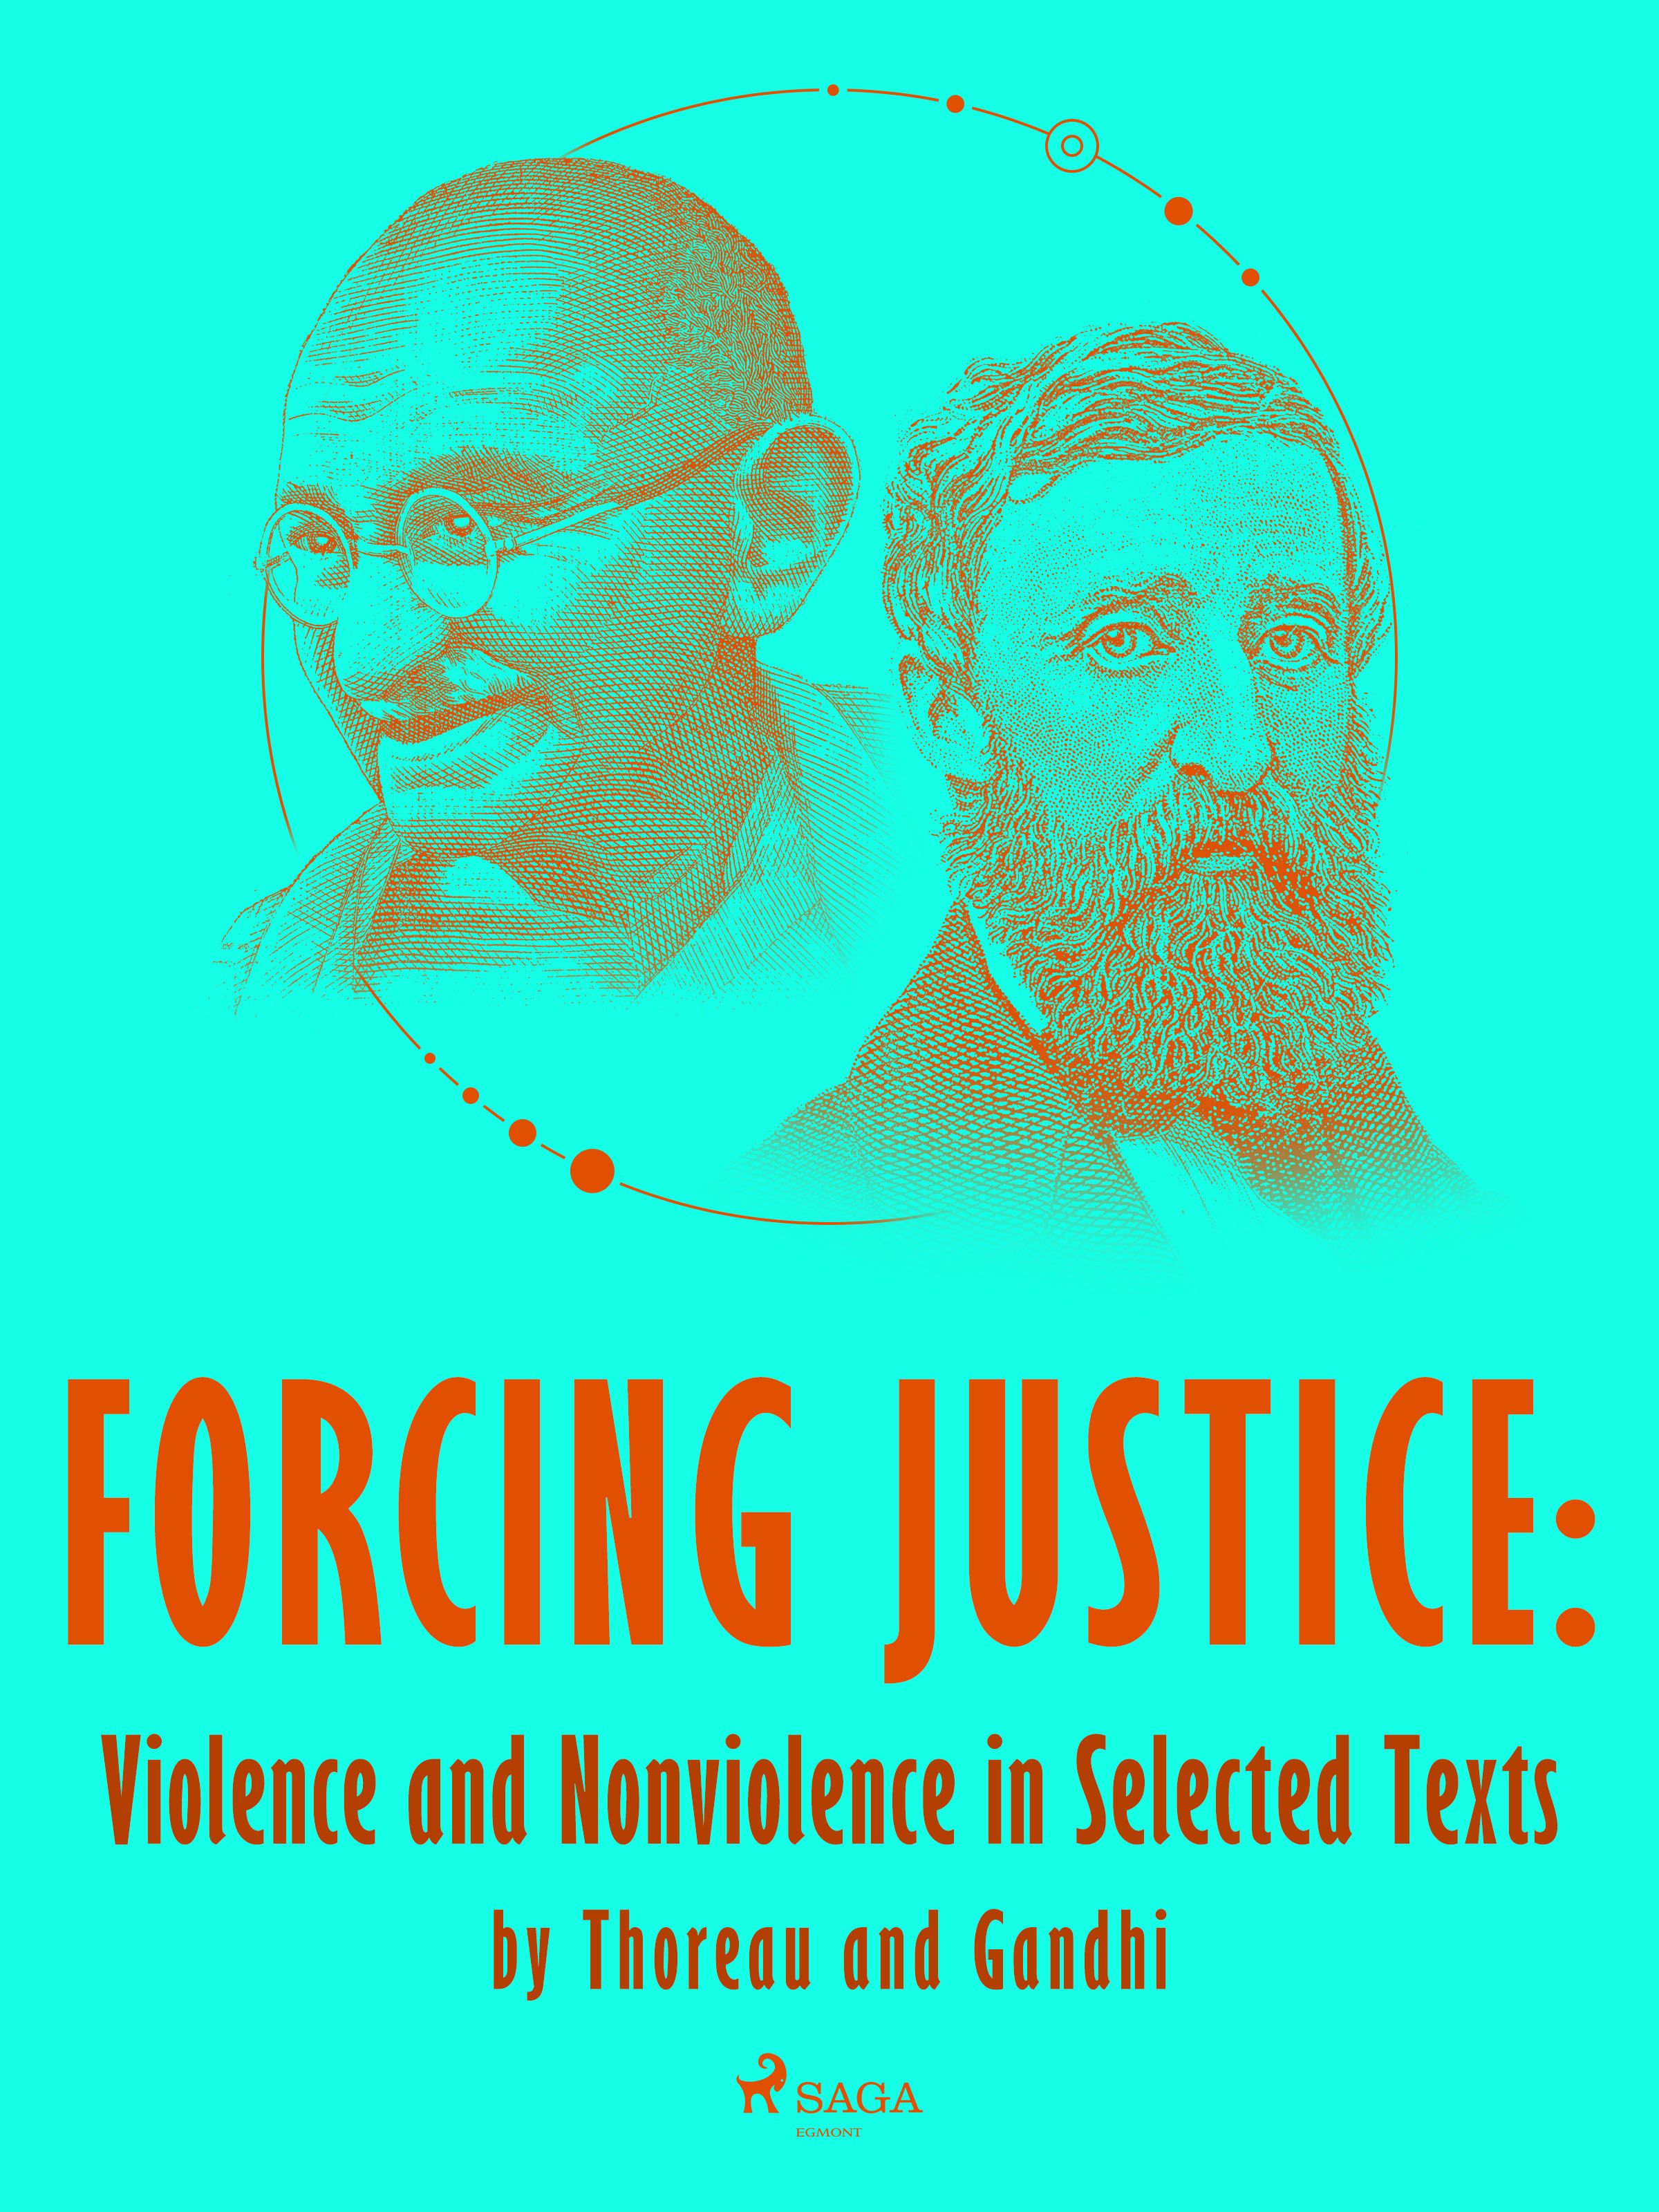 Forcing Justice: Violence and Nonviolence in Selected Texts by Thoreau and Gandhi, eBook by Mahatma Gandhi, Henry David Thoreau